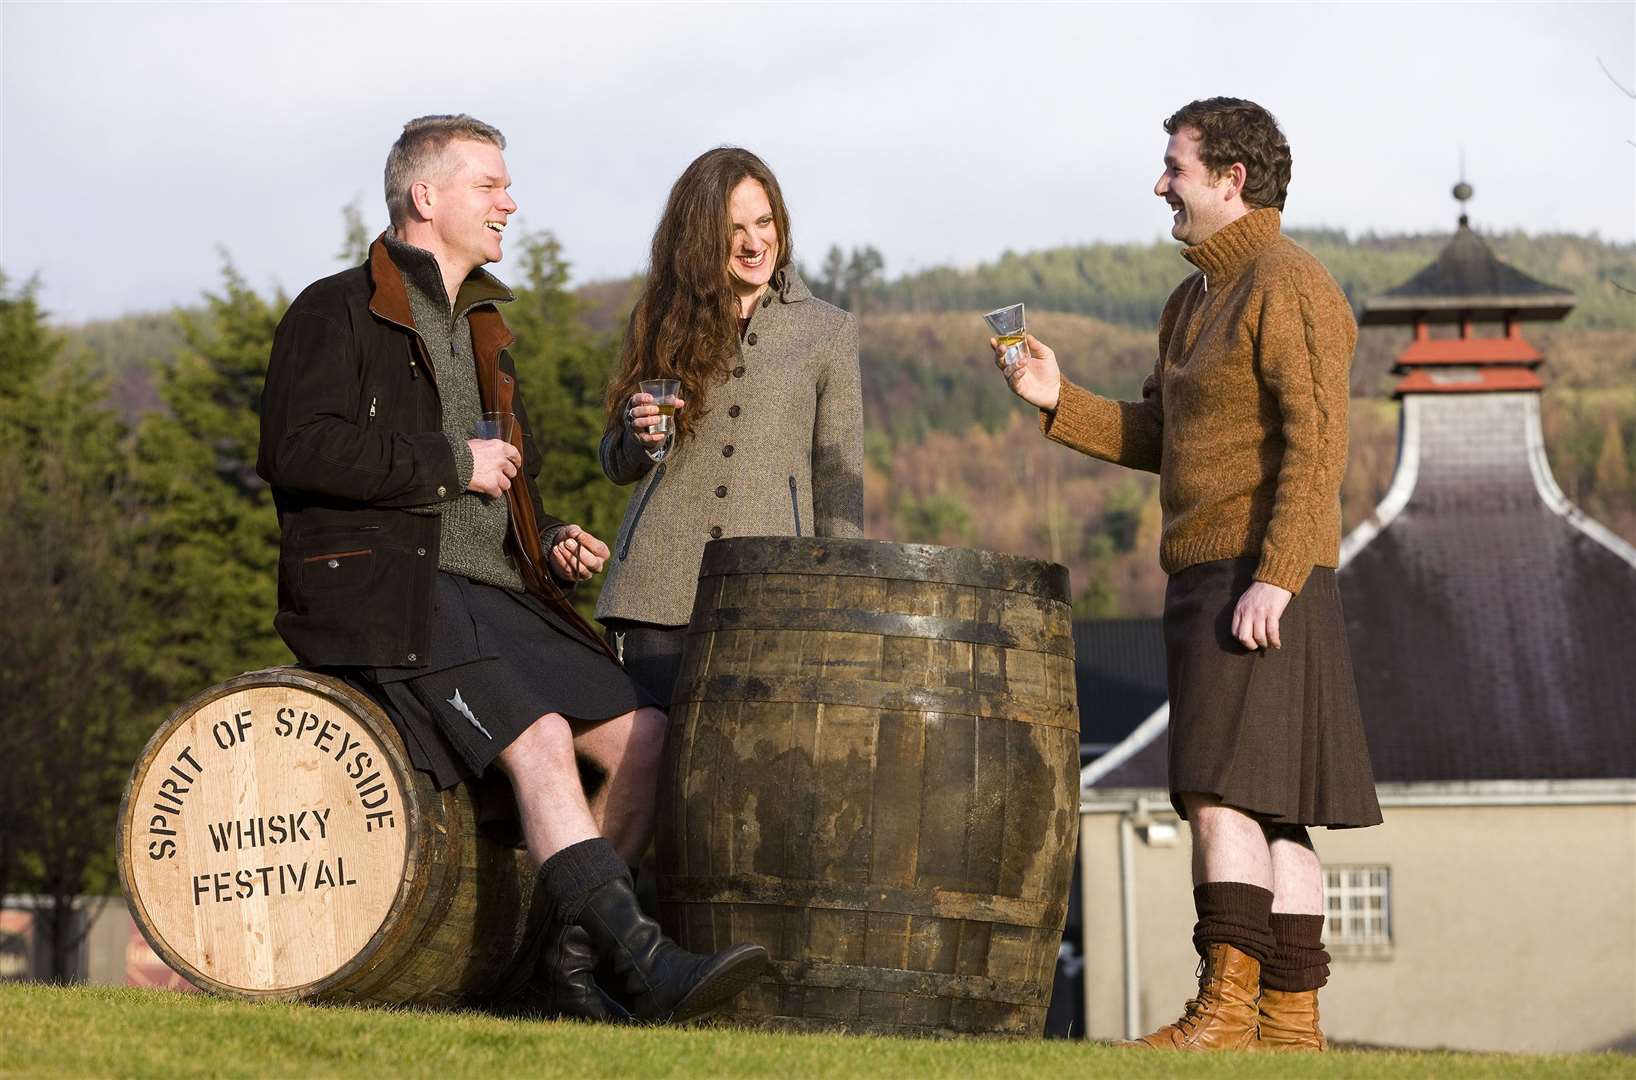 The Spirit of Speyside Whisky Festival is May 1-6. Picture: VisitBritain